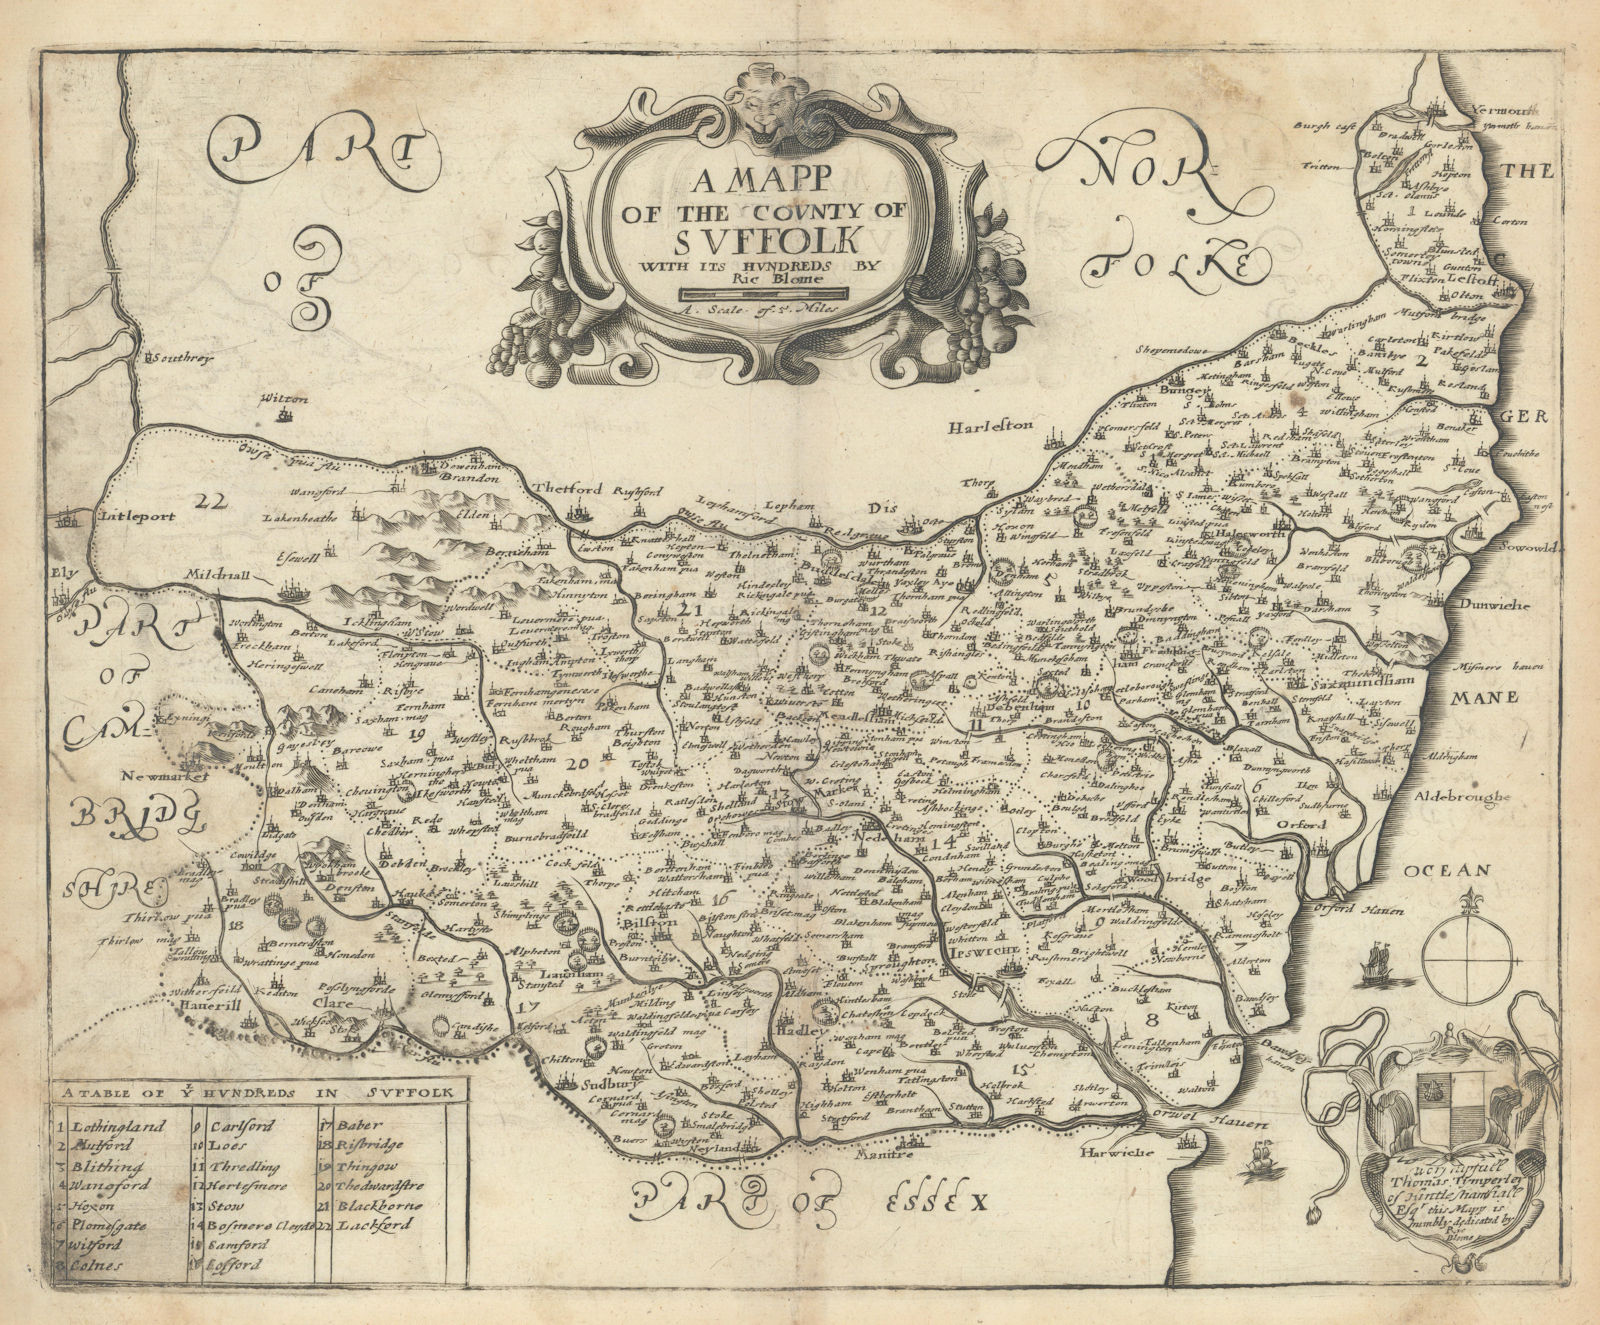 Associate Product A mapp of the County of Suffolk with its Hundreds by Richard Blome 1673